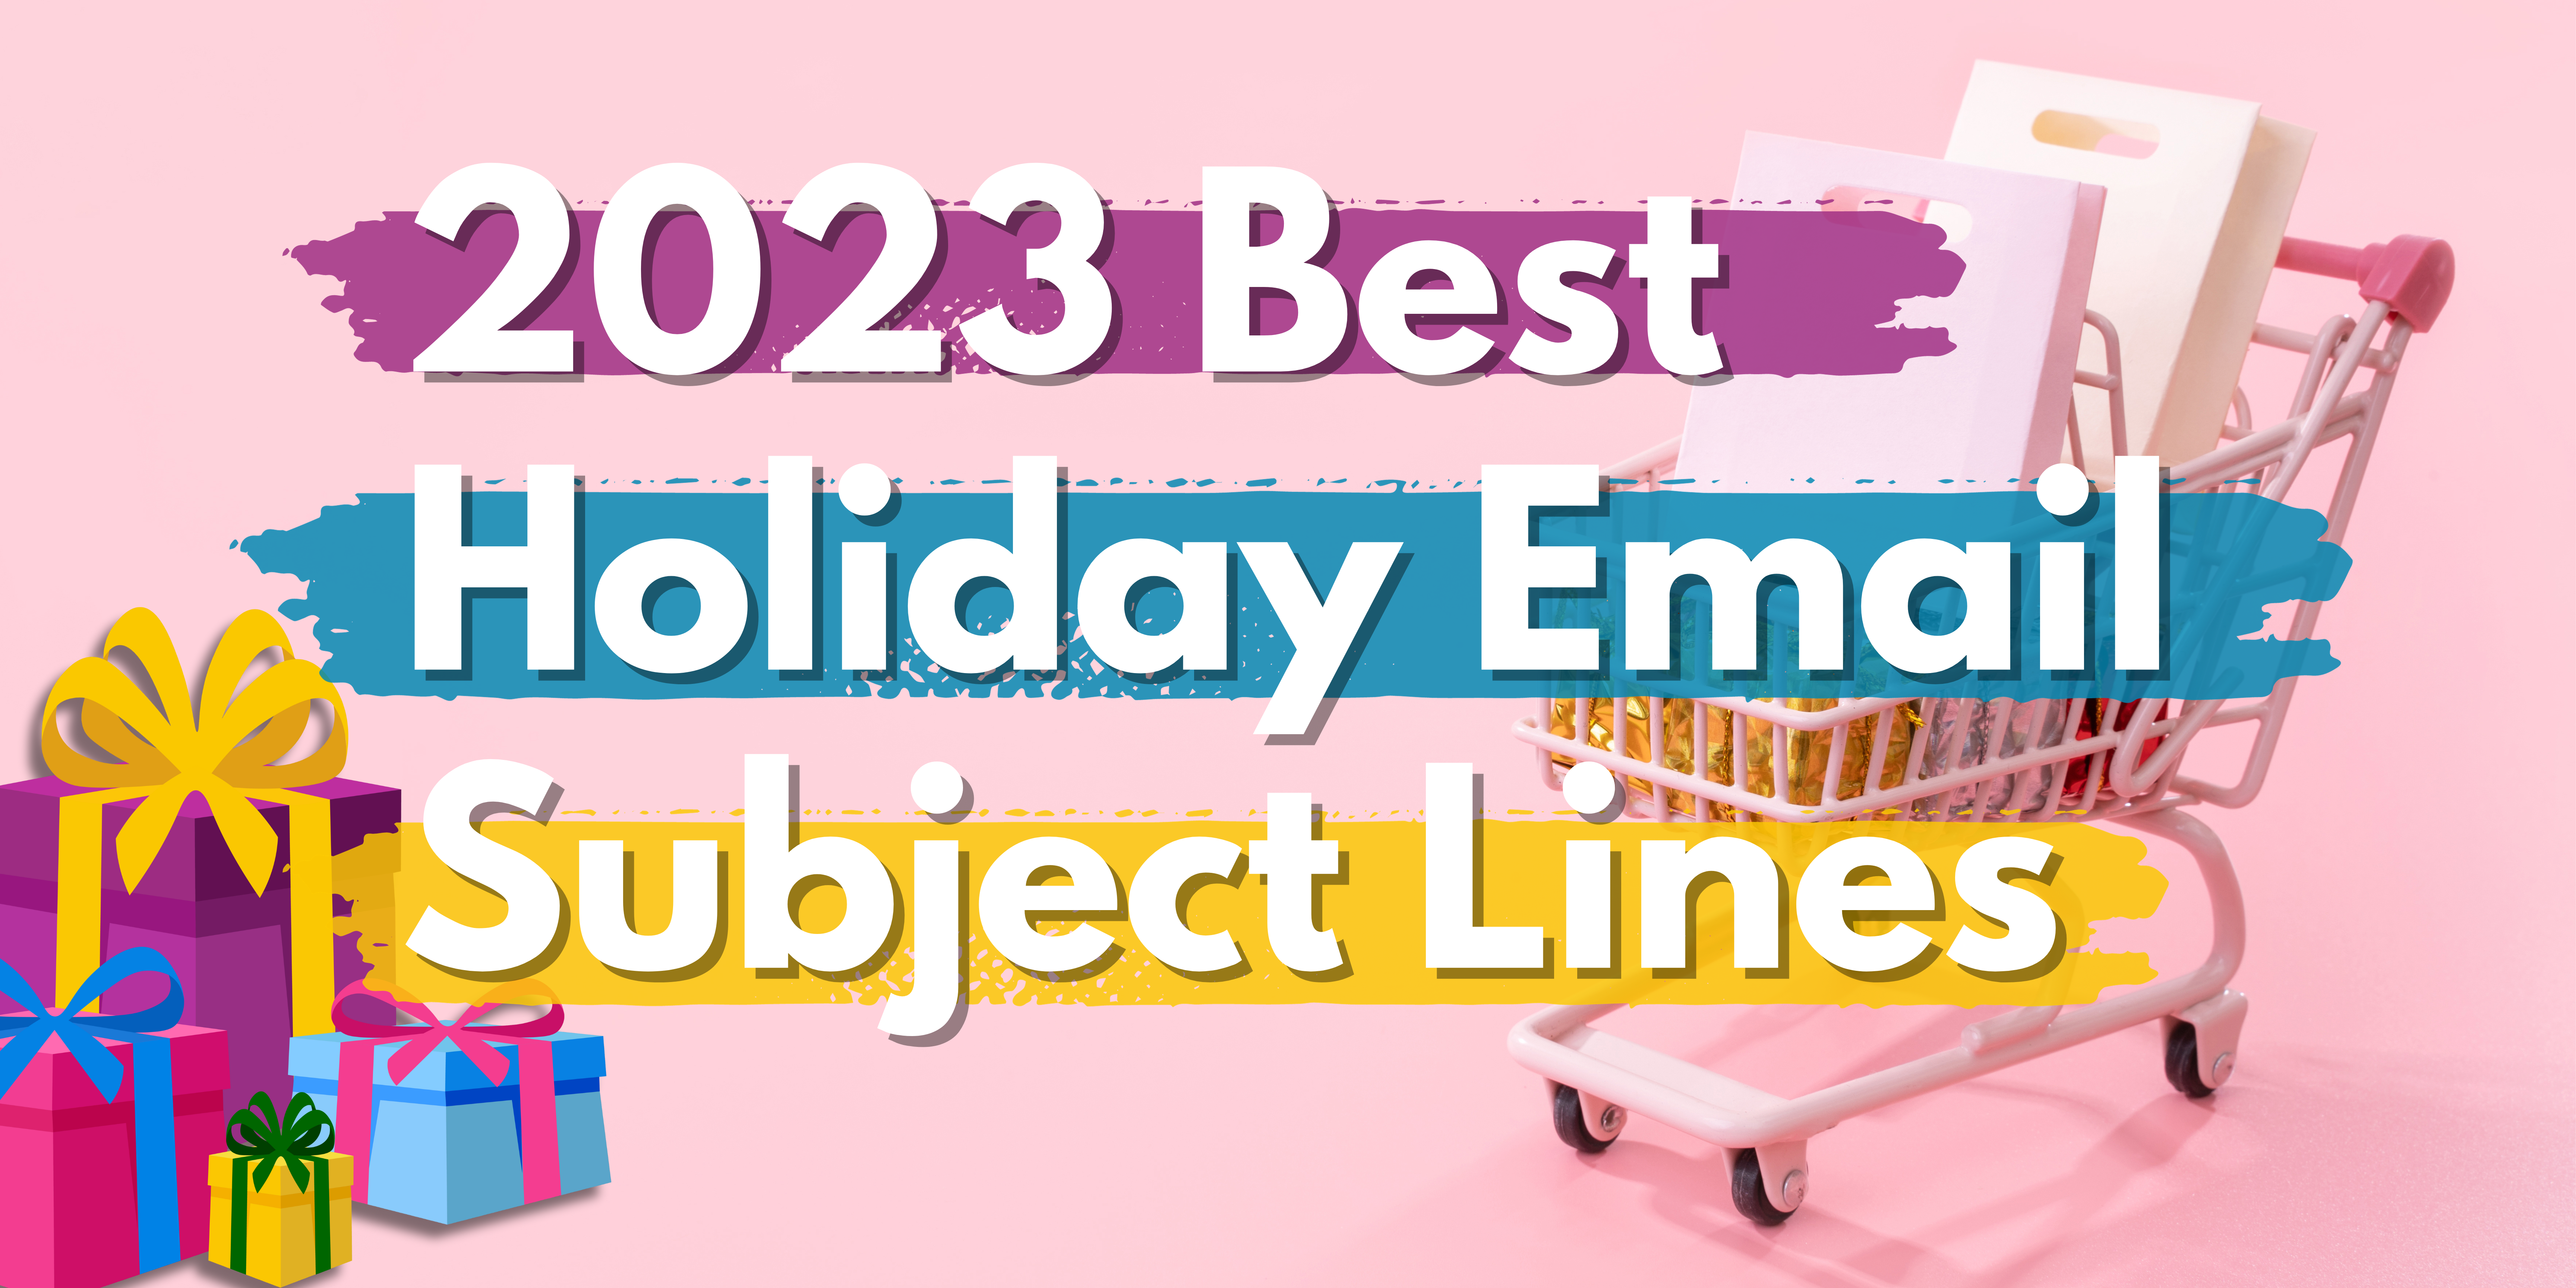 best holiday shopping online